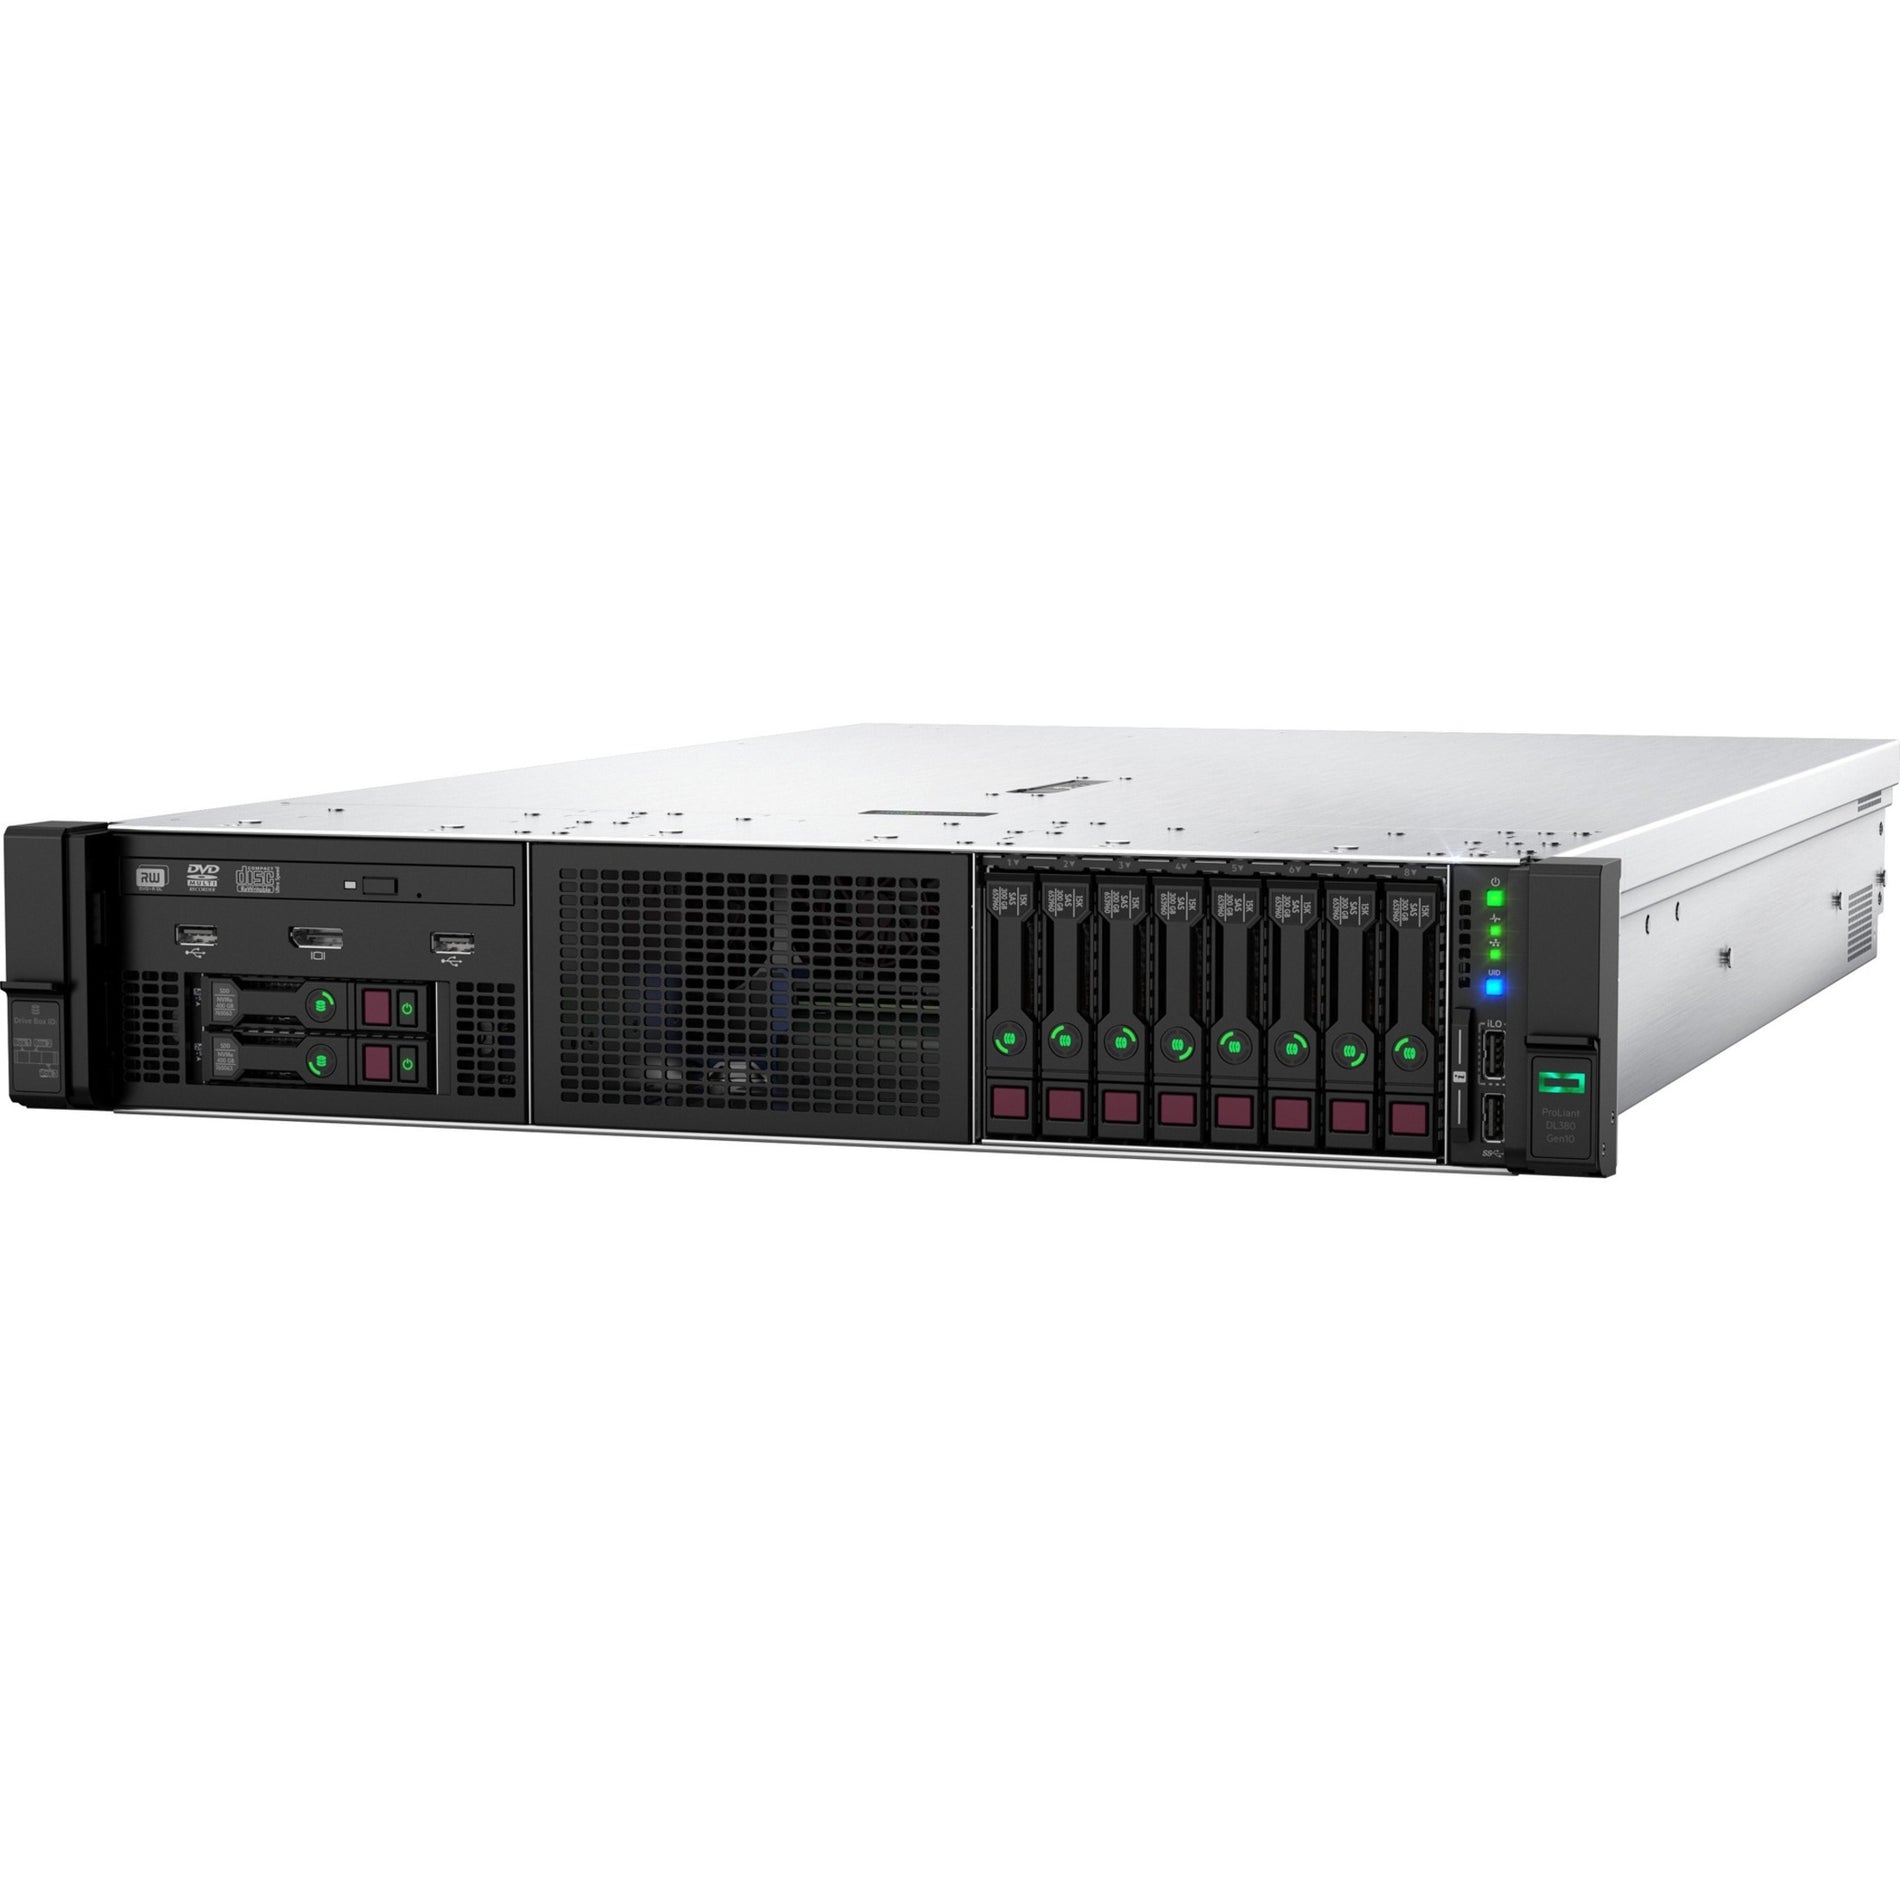 HPE P24849-B21 ProLiant DL380 Gen10 6248R 1P 32GB-R S100i NC 8SFF 800W PS Server, Powerful and Reliable Rack Server for Your Business